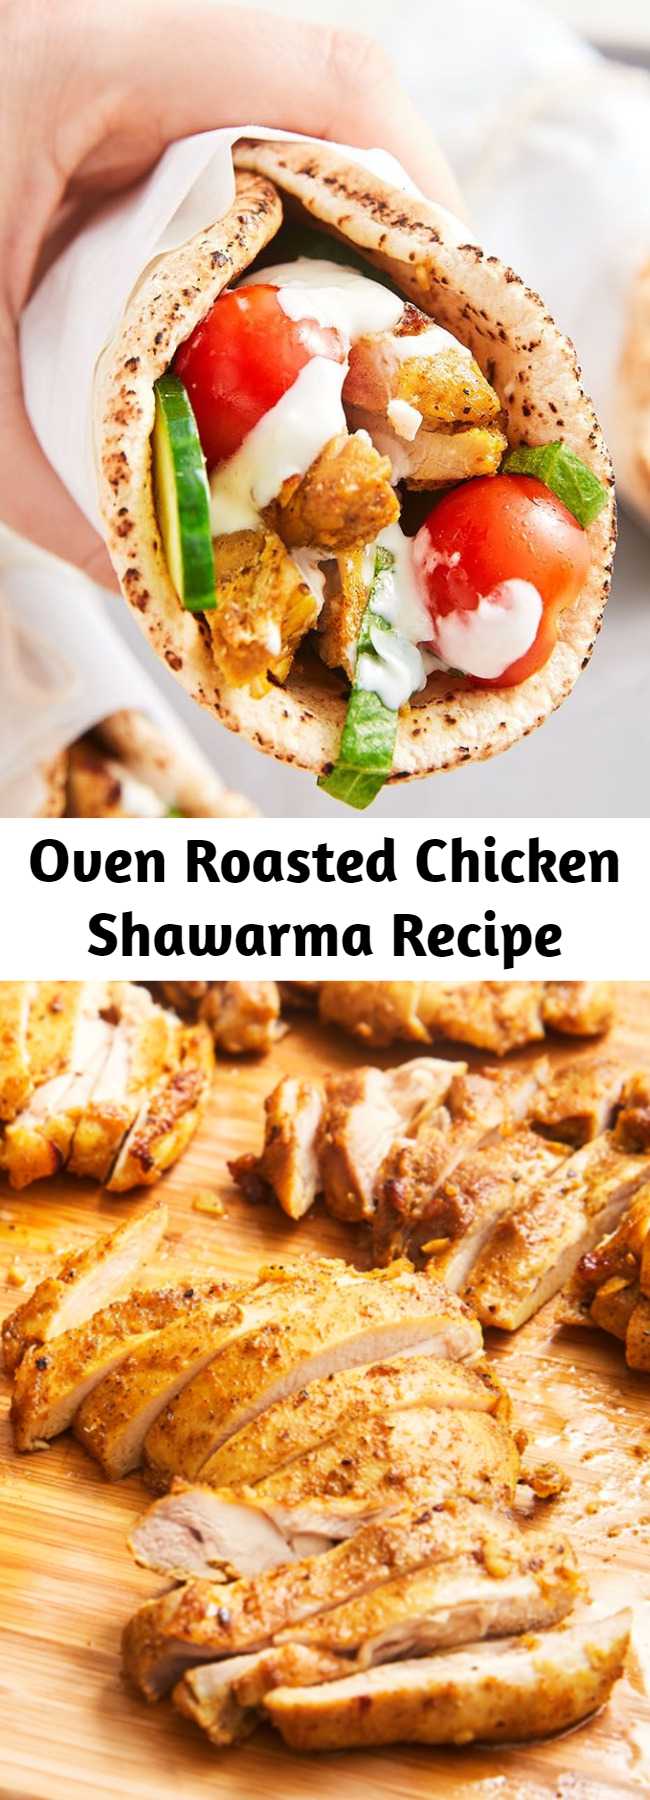 Oven Roasted Chicken Shawarma Recipe - Shawarma refers to the Middle Eastern method cooking where thin slices of meat, most traditionally lamb, are stack on a vertical spit and slowly rotate in front of a fire or other heat source. The outside meat is slowly cooked and then shaved off to serve. It's a common street food and the result is tender, juicy, well spiced meat.